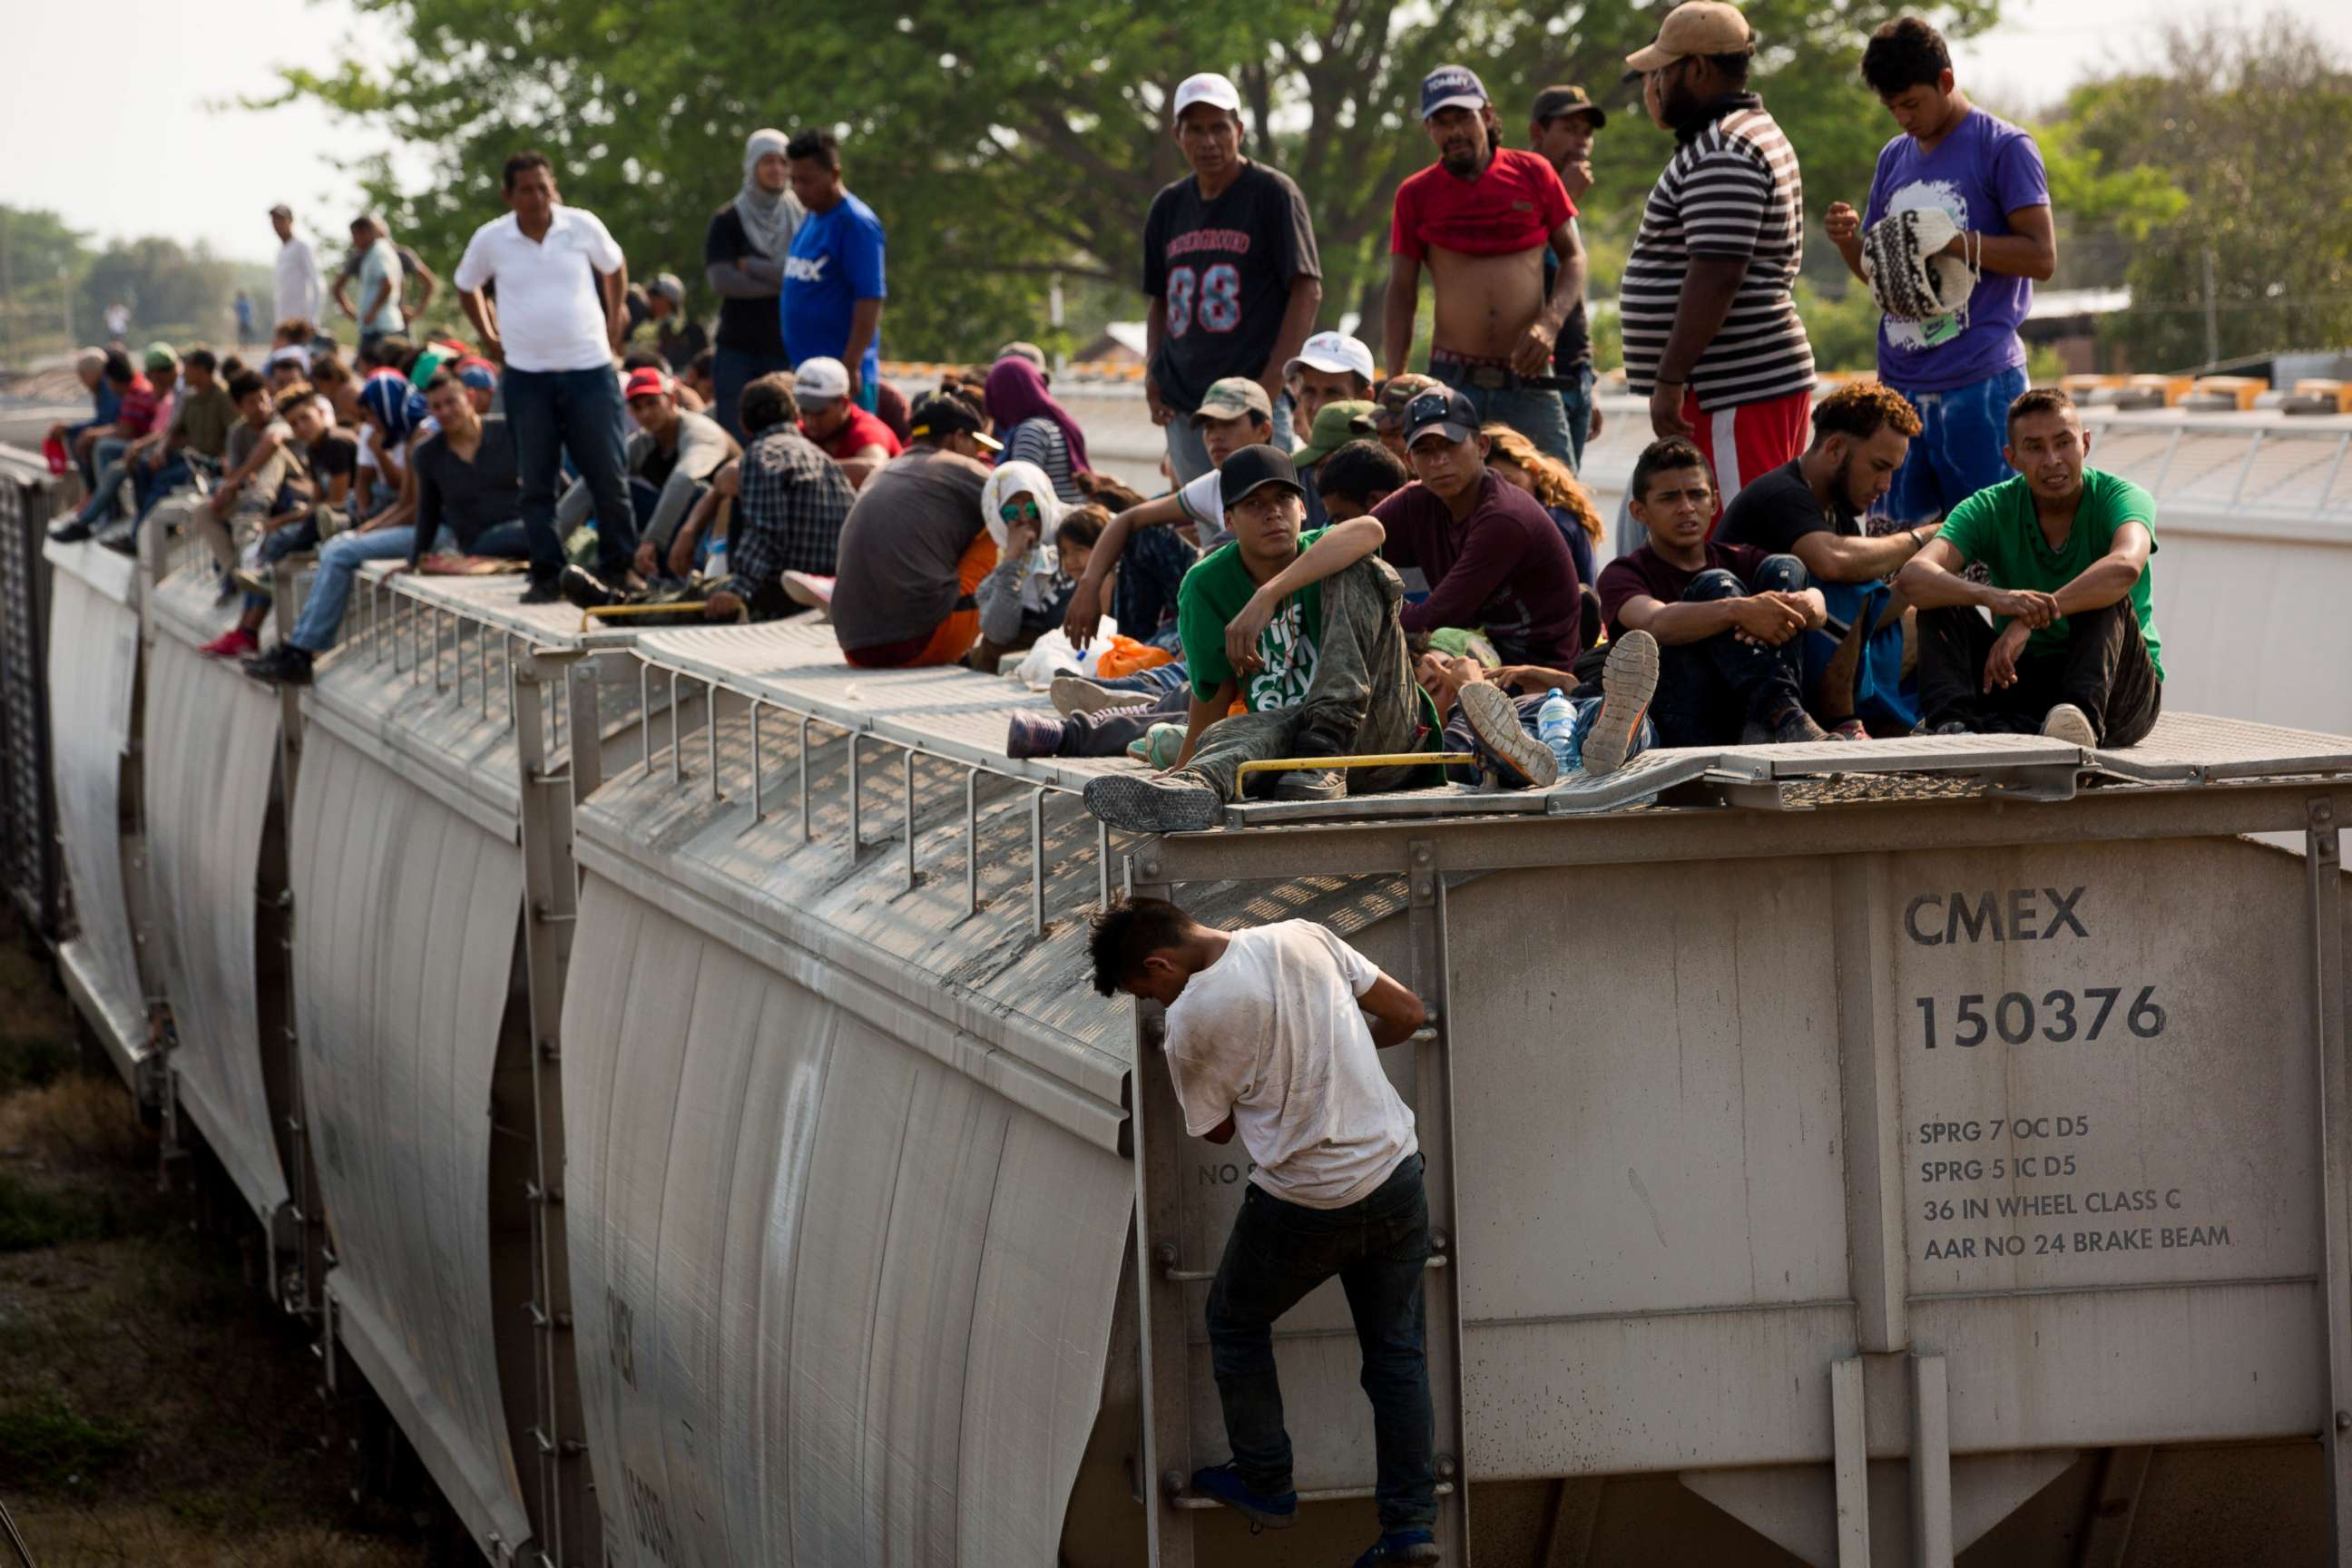 PHOTO:Central American migrants wait on the top of a parked train during their journey toward the US-Mexico border in Ixtepec, Oaxaca state, Mexico, April 23, 2019.